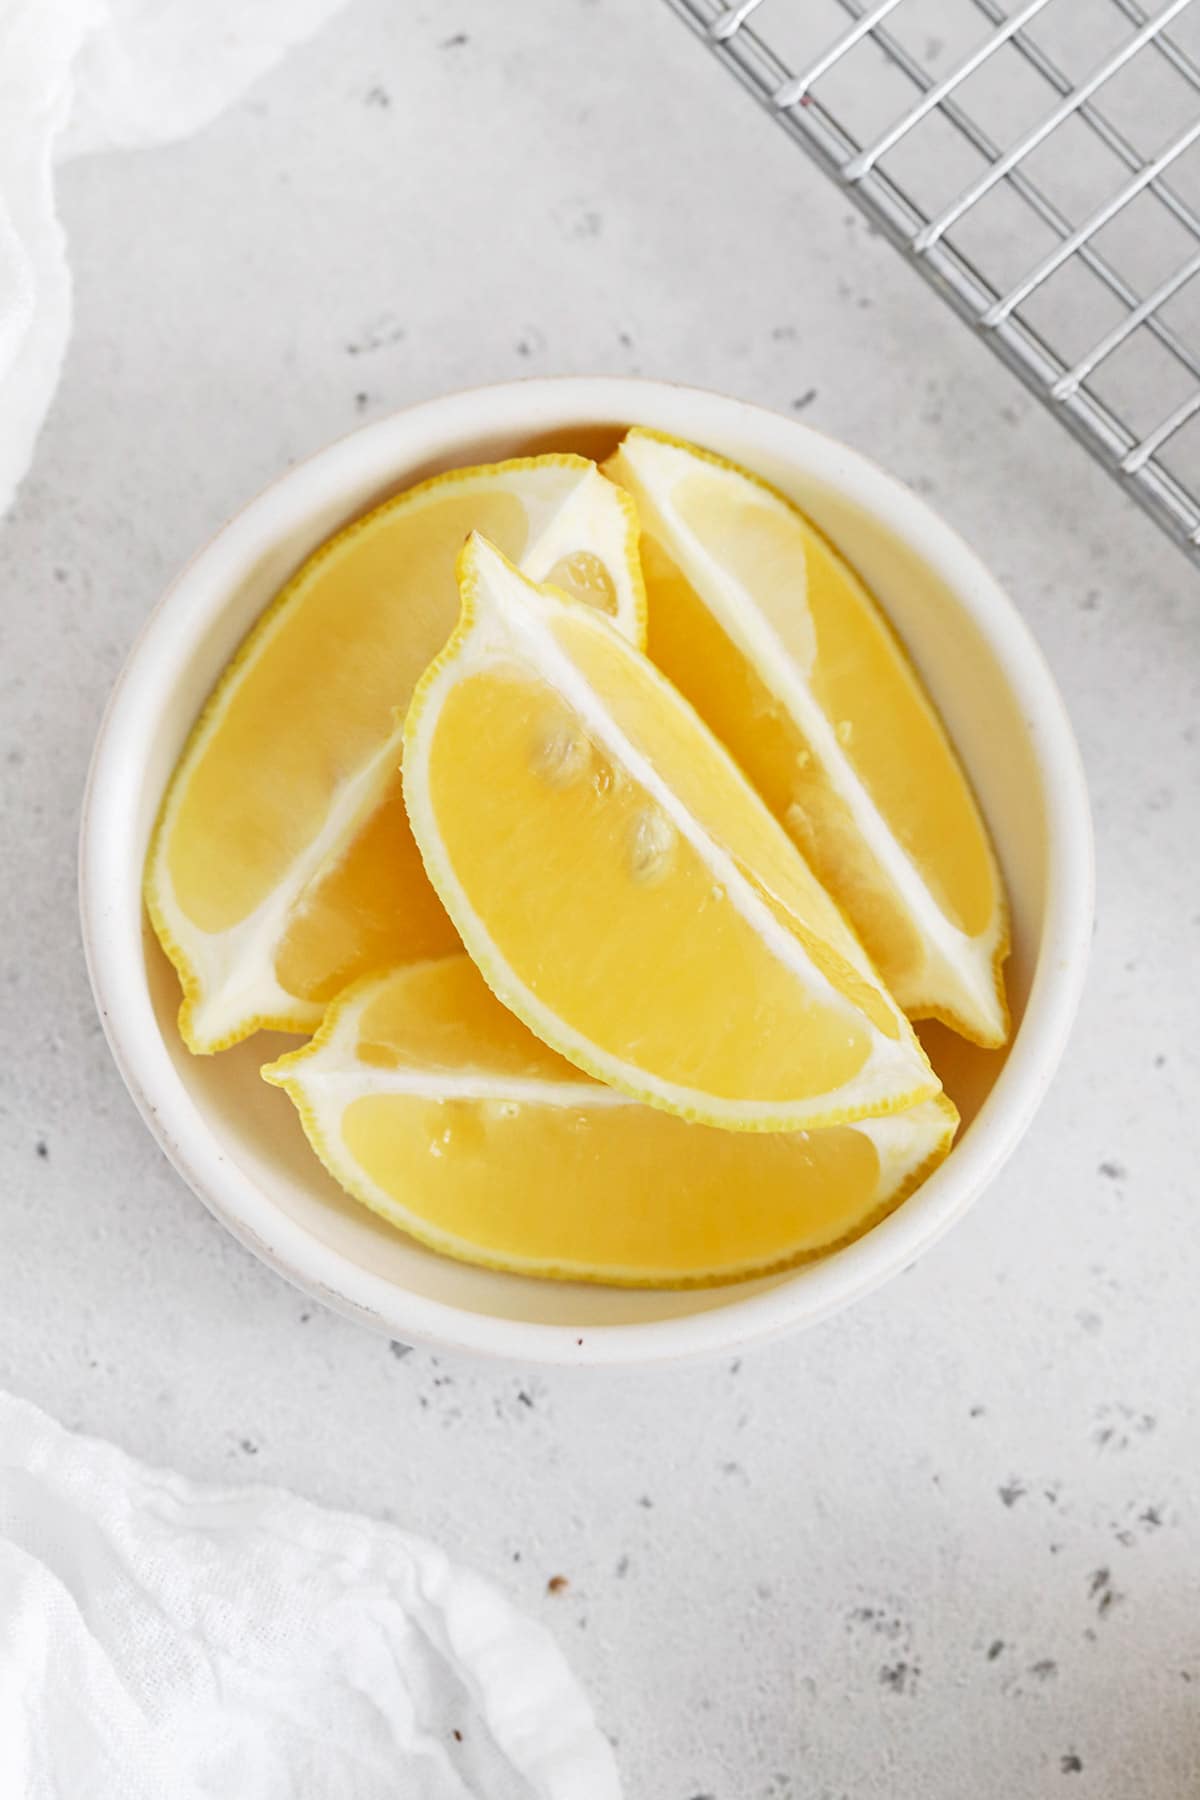 Overhead view of a bowl of lemon wedges